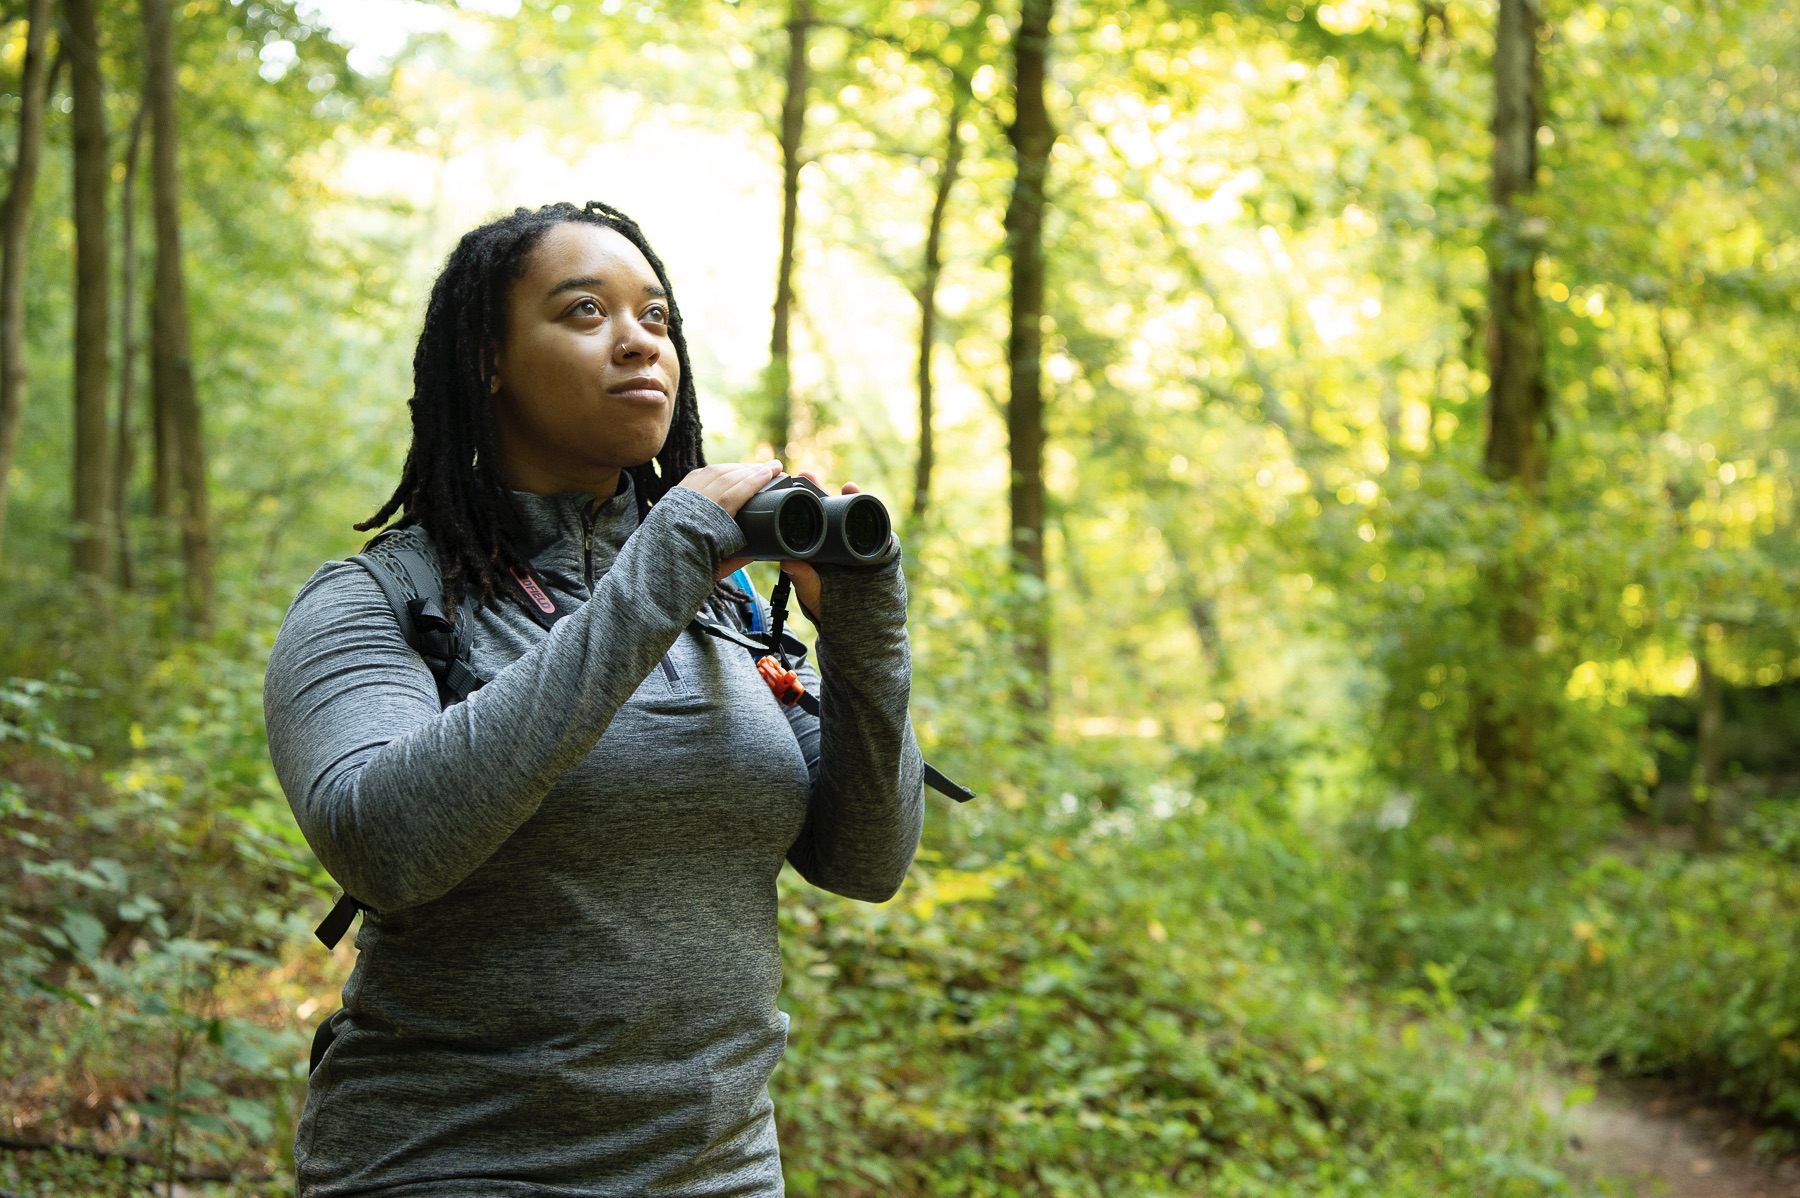 A woman holds up binoculars in a green forest.